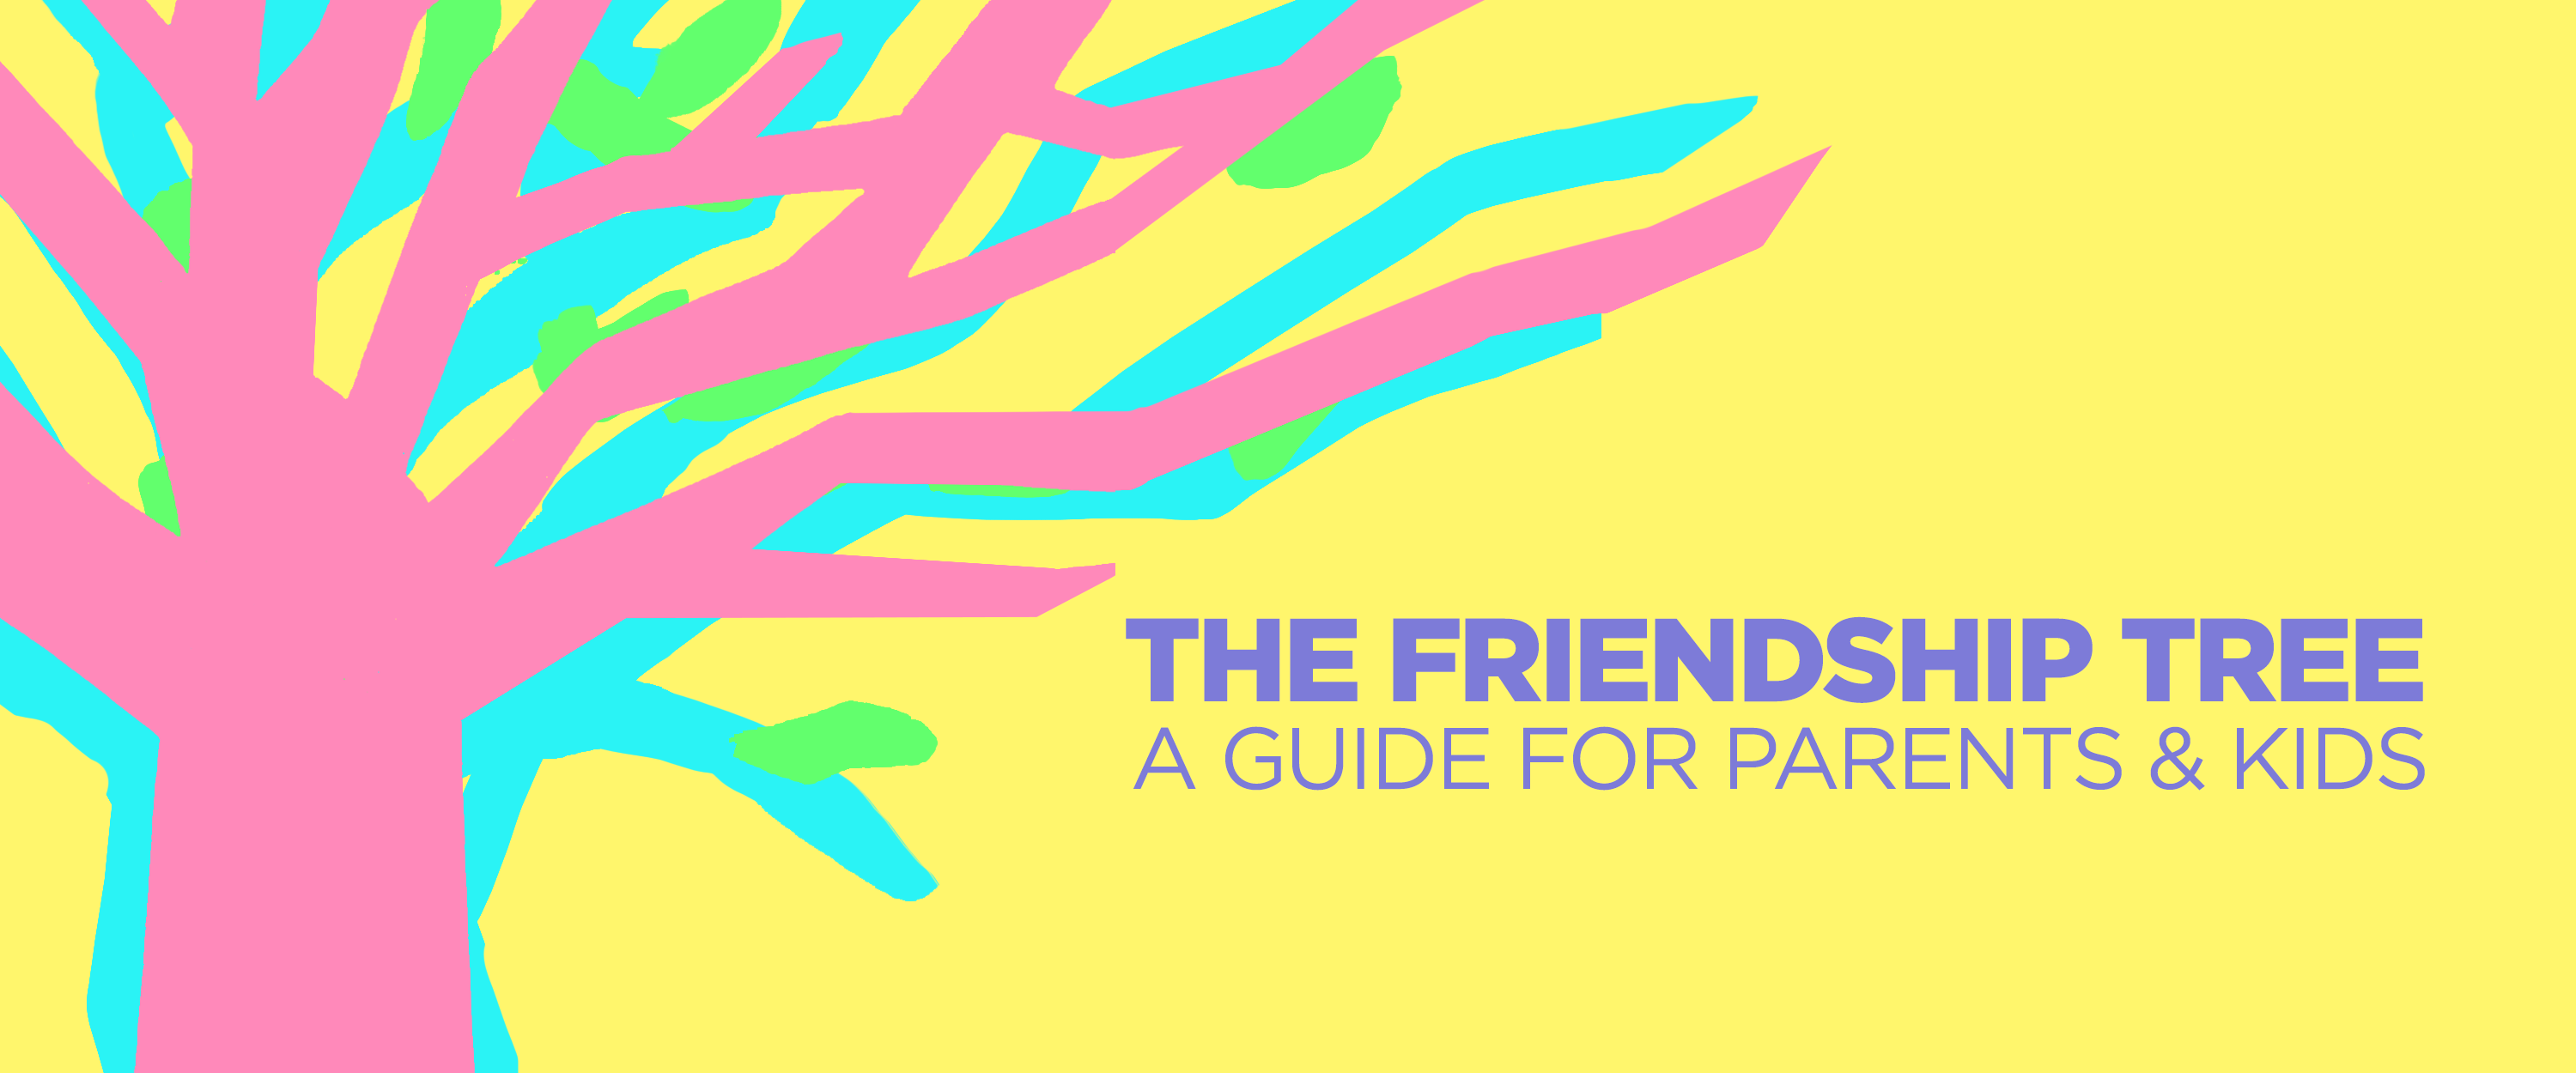 The Friendship Tree: A Guide for Parents and Kids